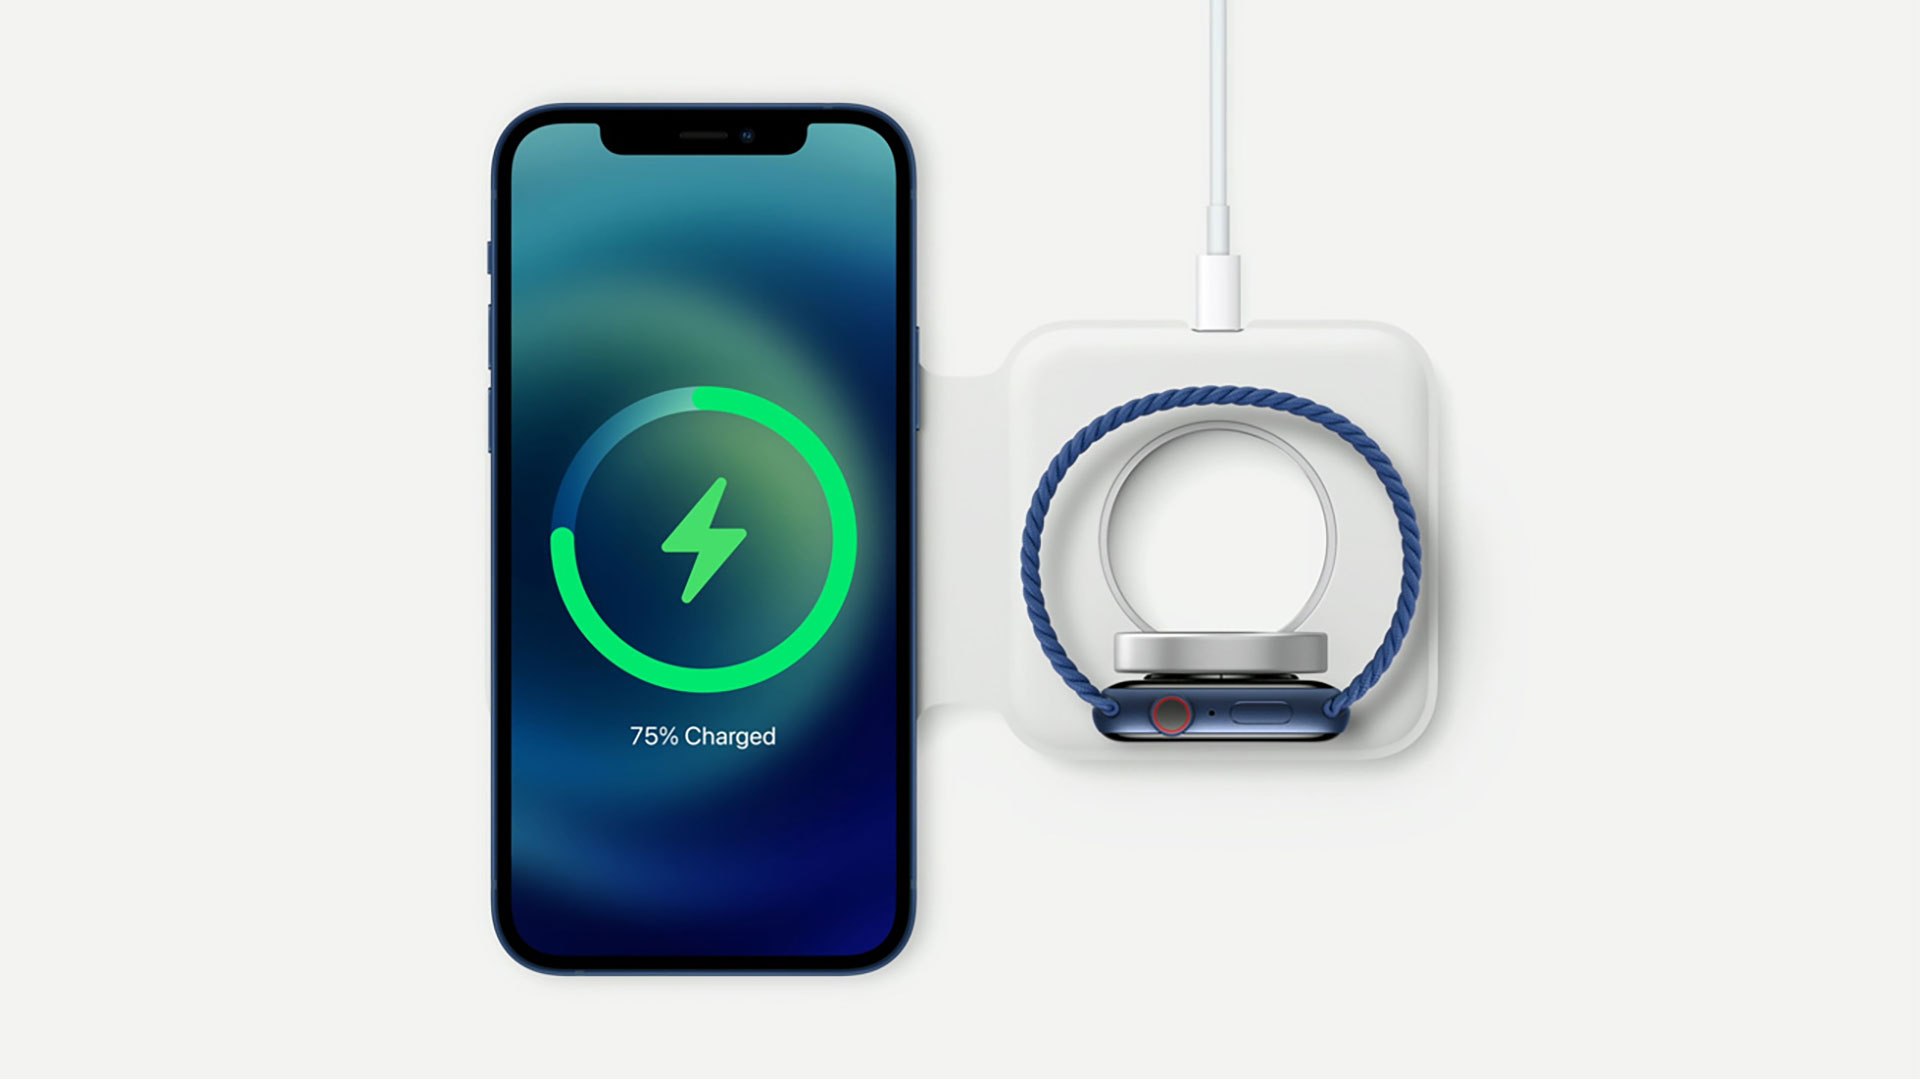 Apple iPhone 12 MagSafe wireless charging